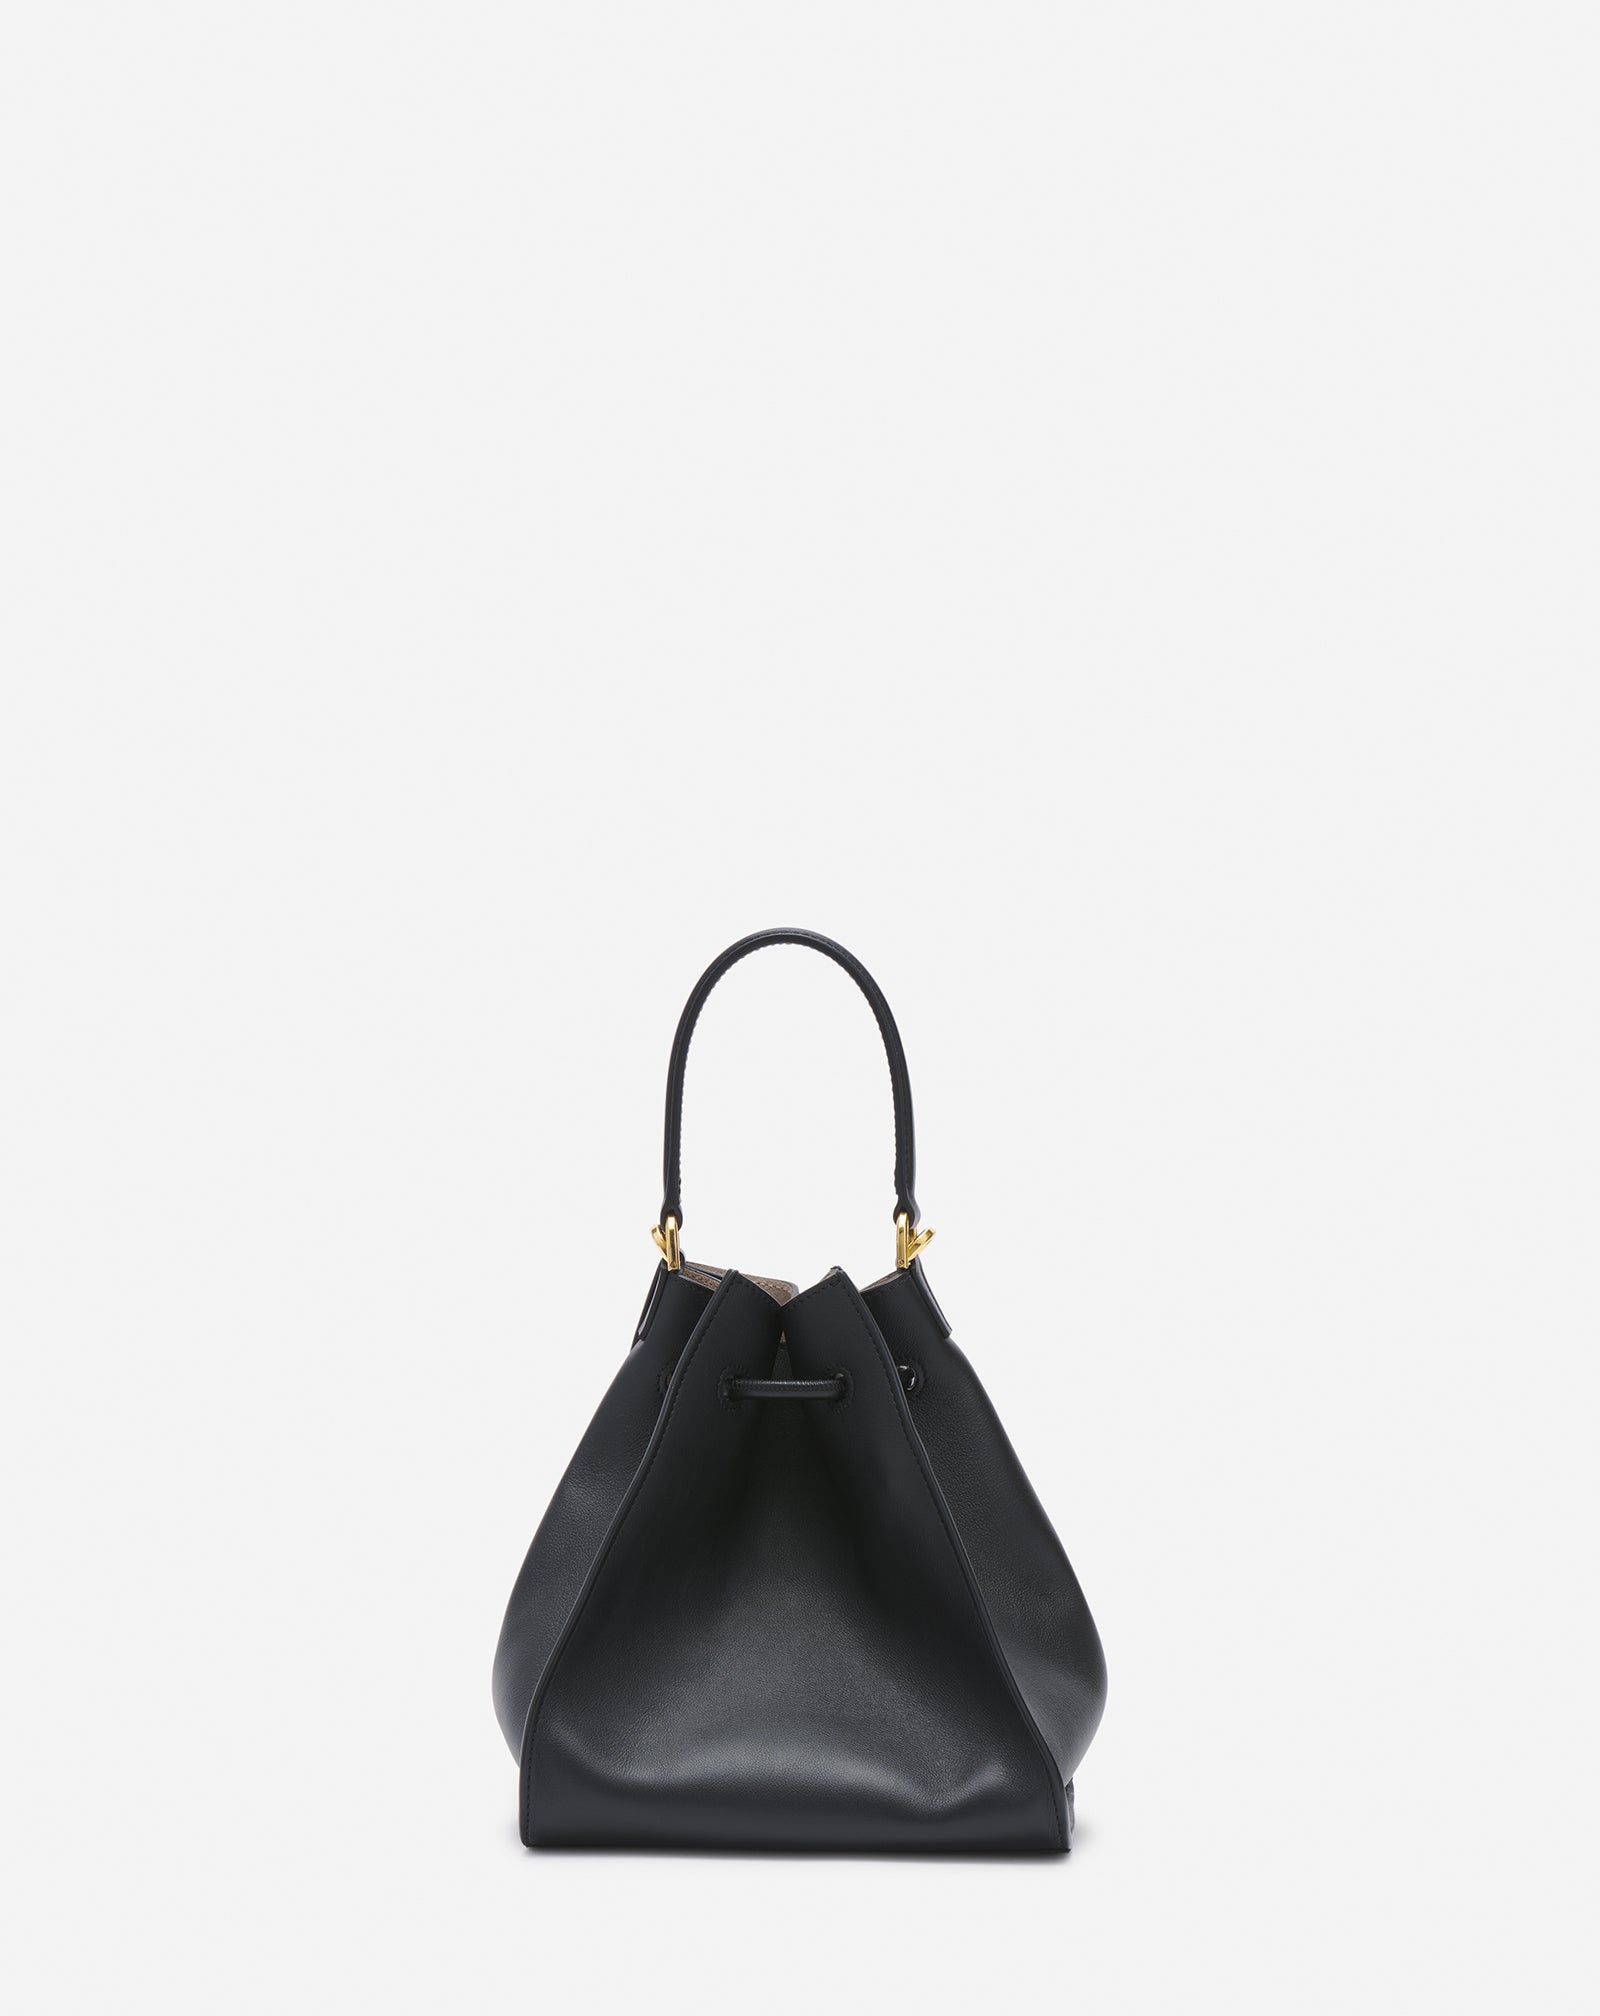 SMALL LEATHER SEQUENCE BY LANVIN HANDBAG, BLACK